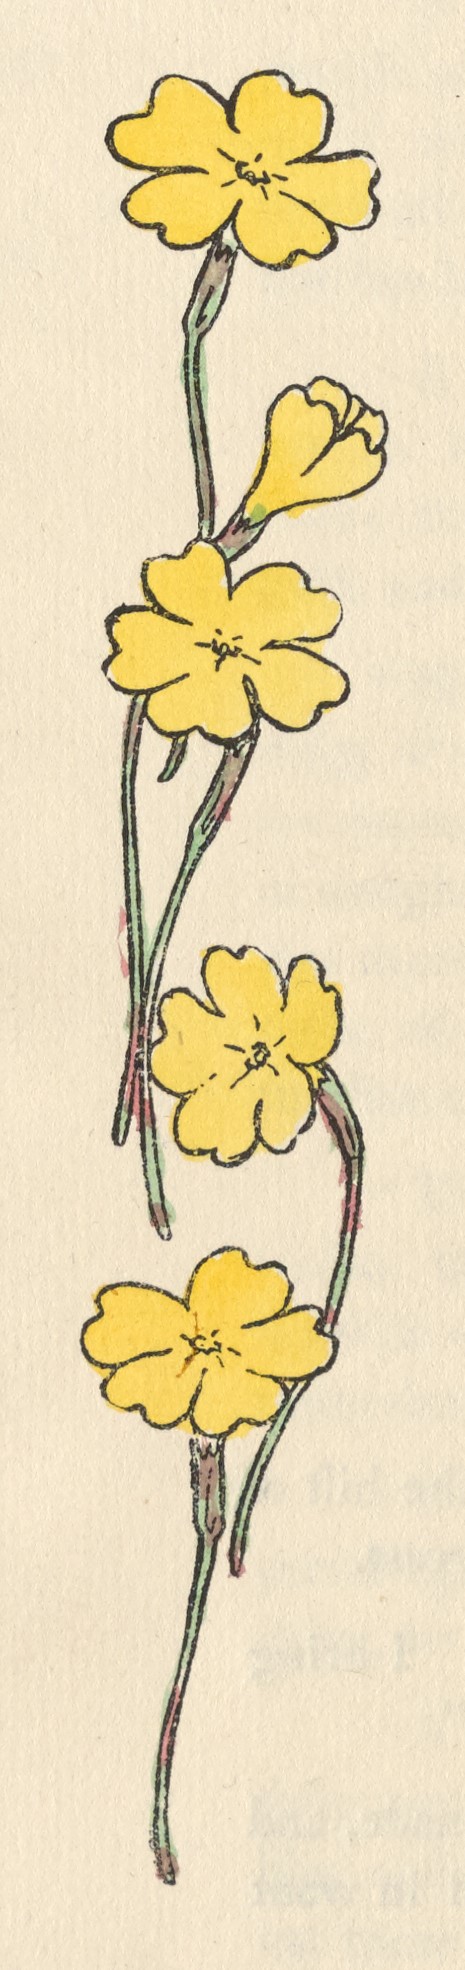 5 yellow flowers on green stems extend the length of the letterpress in the left margin.